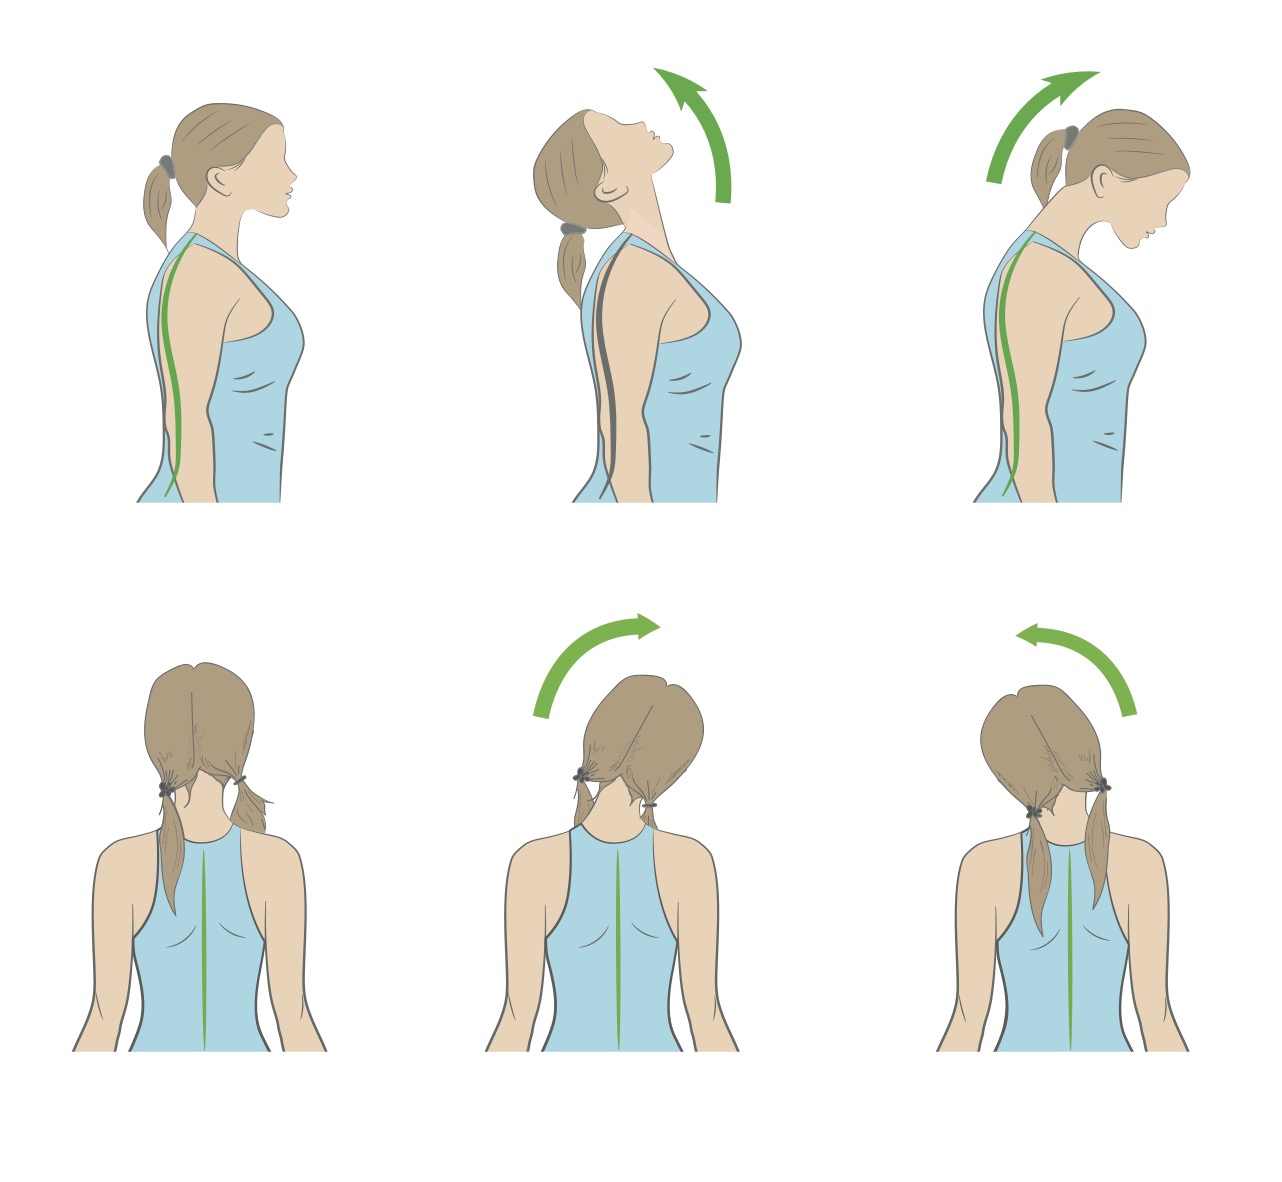 How To Fix A Pinched Nerve In Neck - 5 Exercises For Relief